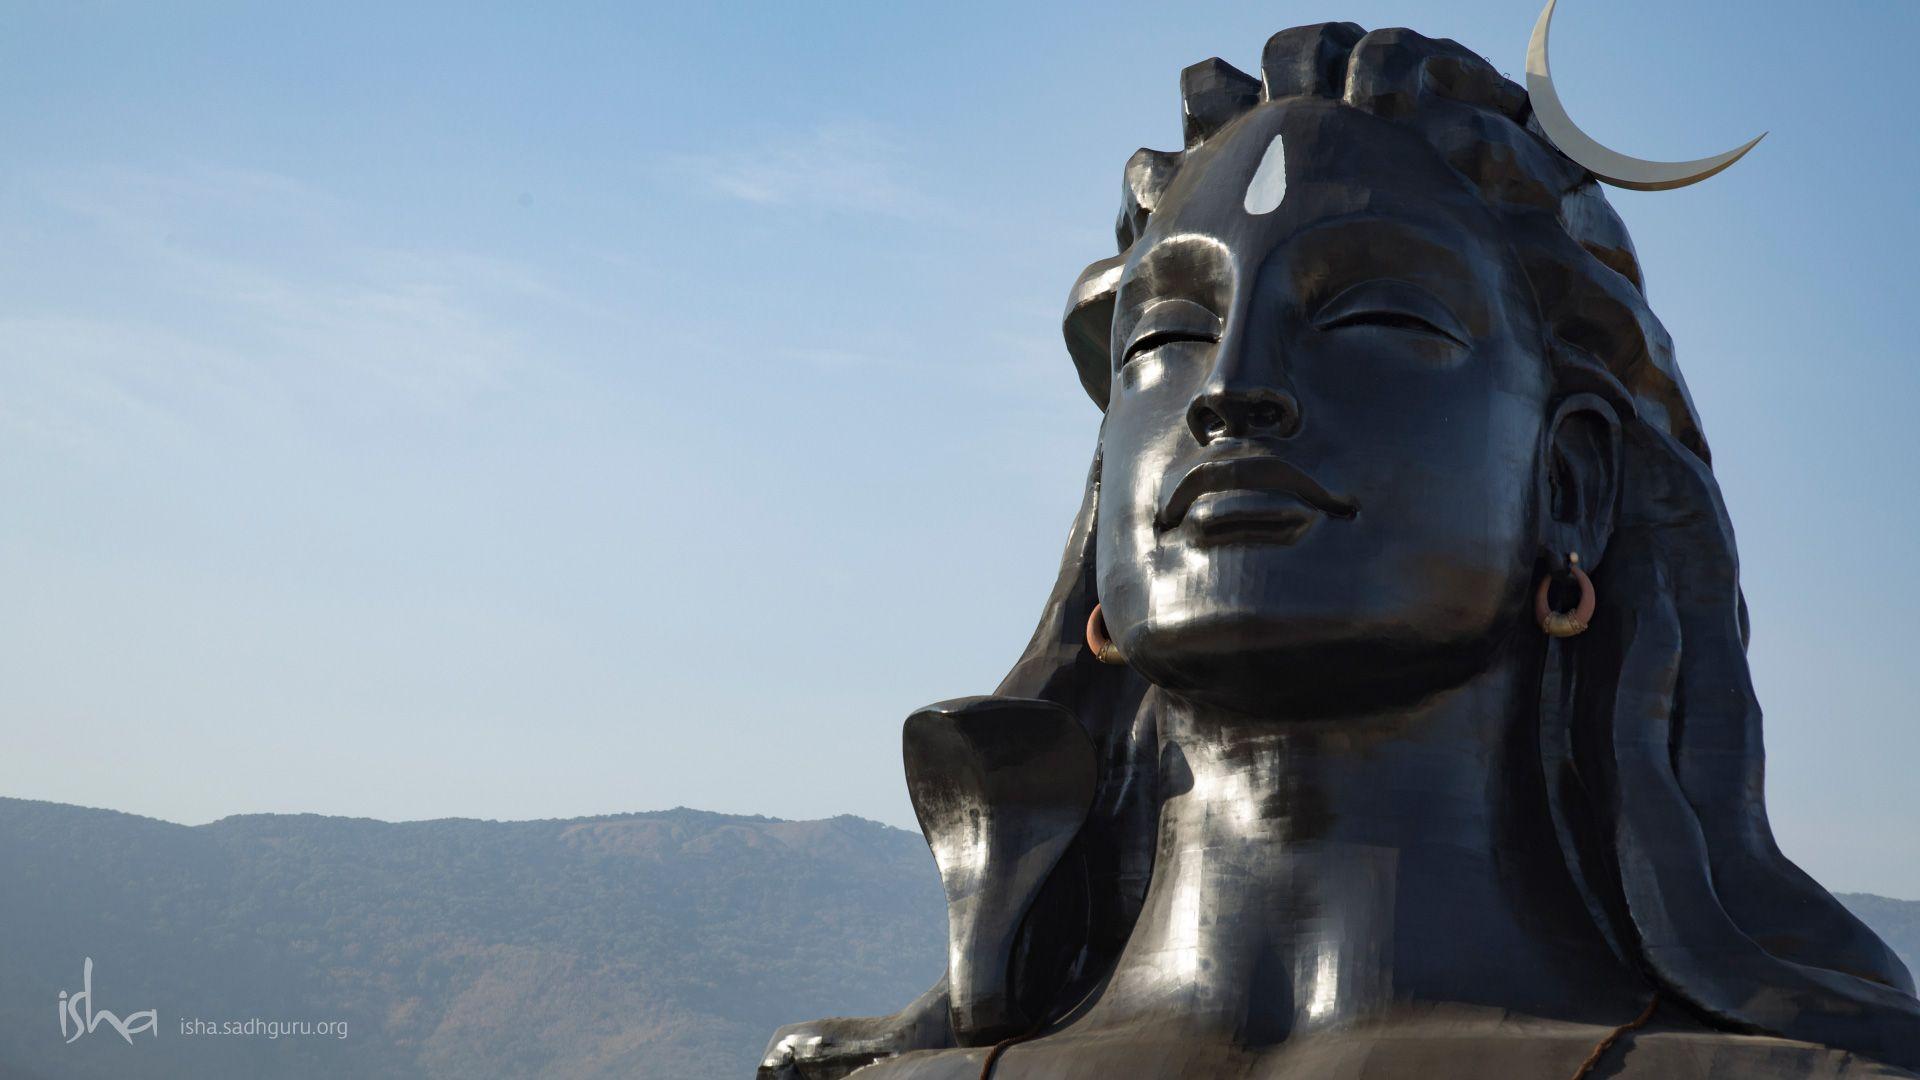 Adiyogi Wallpapers Top Free Adiyogi Backgrounds Wallpaperaccess Available in hd quality for both mobile and. adiyogi wallpapers top free adiyogi